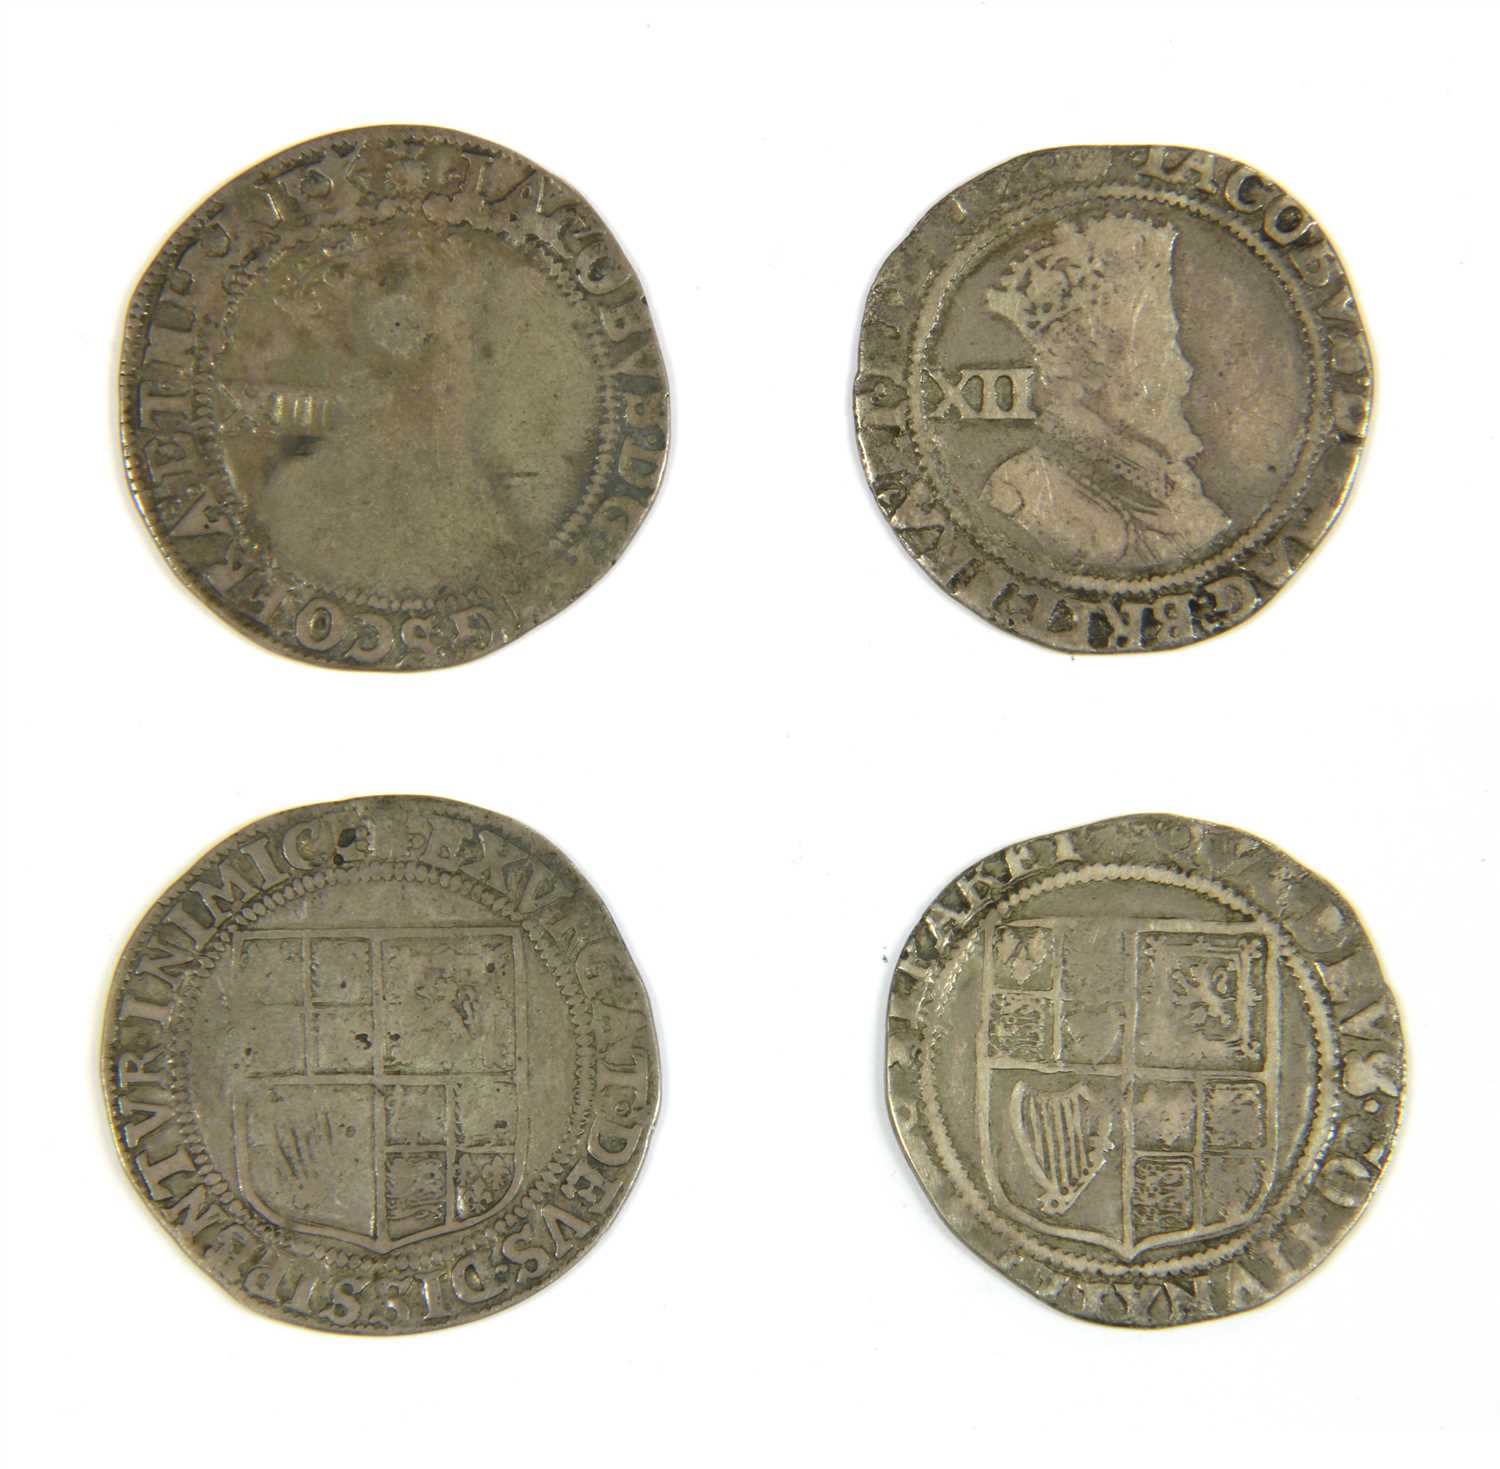 Lot 33 - Coins, Great Britain, James I (1603-1625)